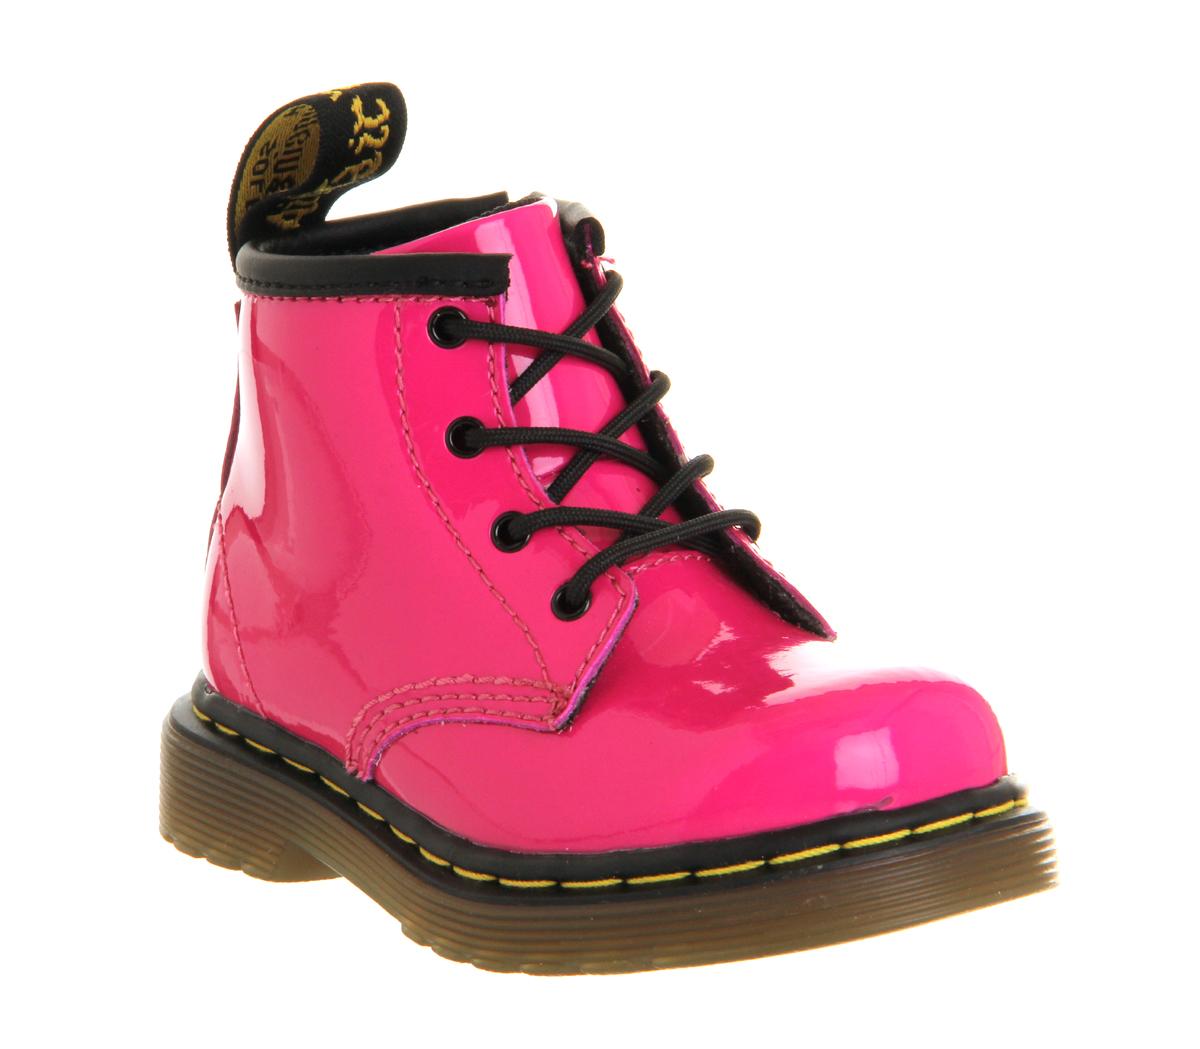 Dr. Martens Kids Lace Up Boots Inside Zip Brooklee Hot Pink Patent - Unisex